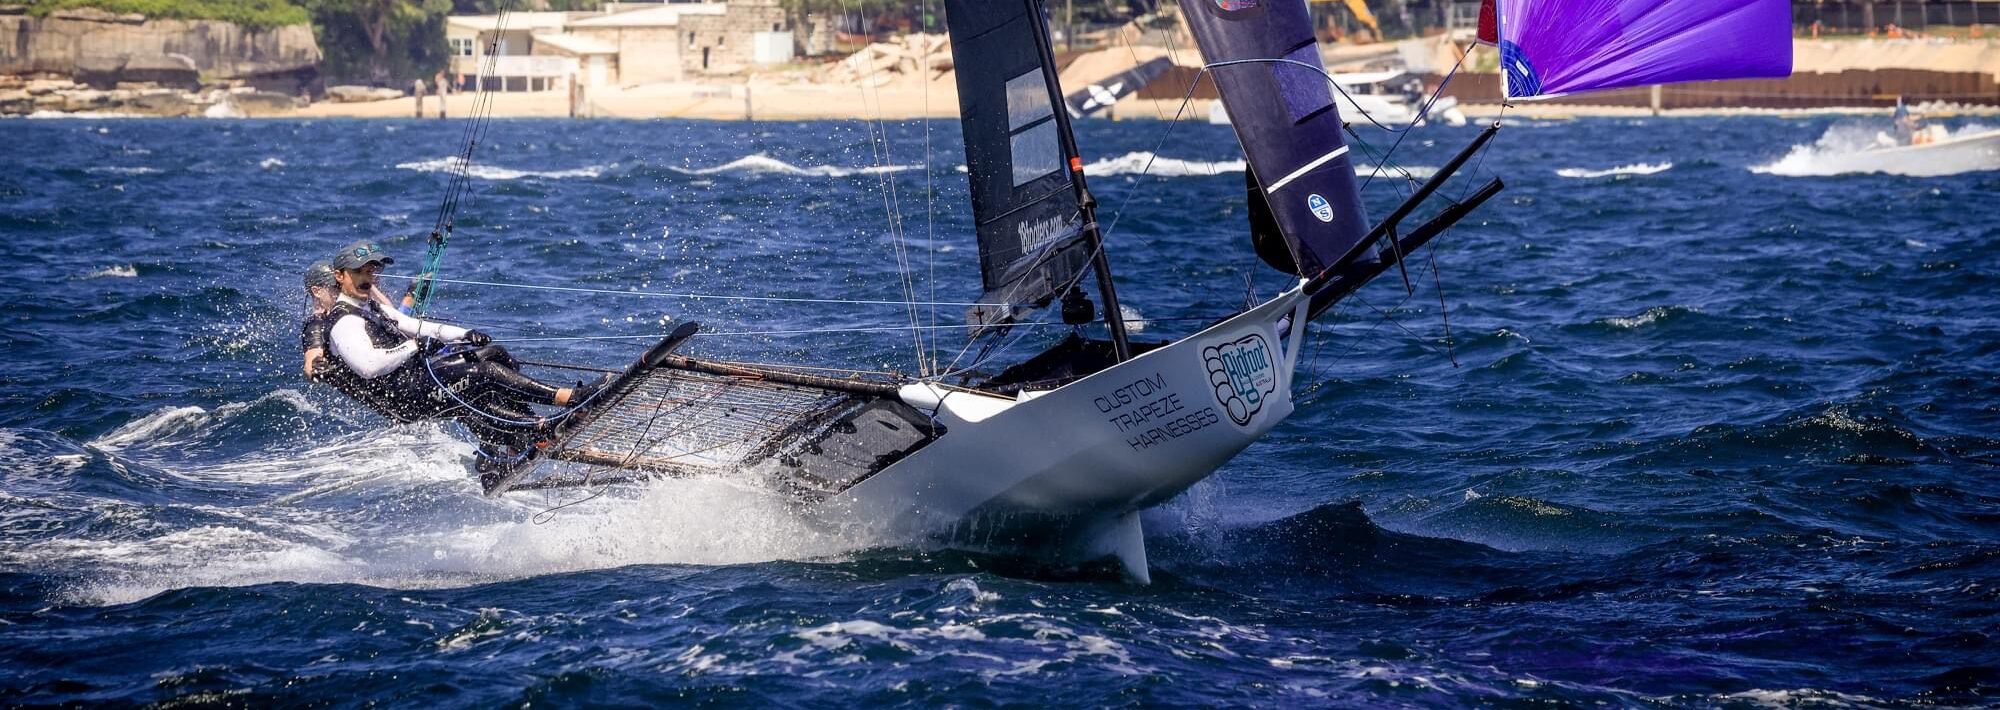 18 foot skiff with spinnaker jumping through waves